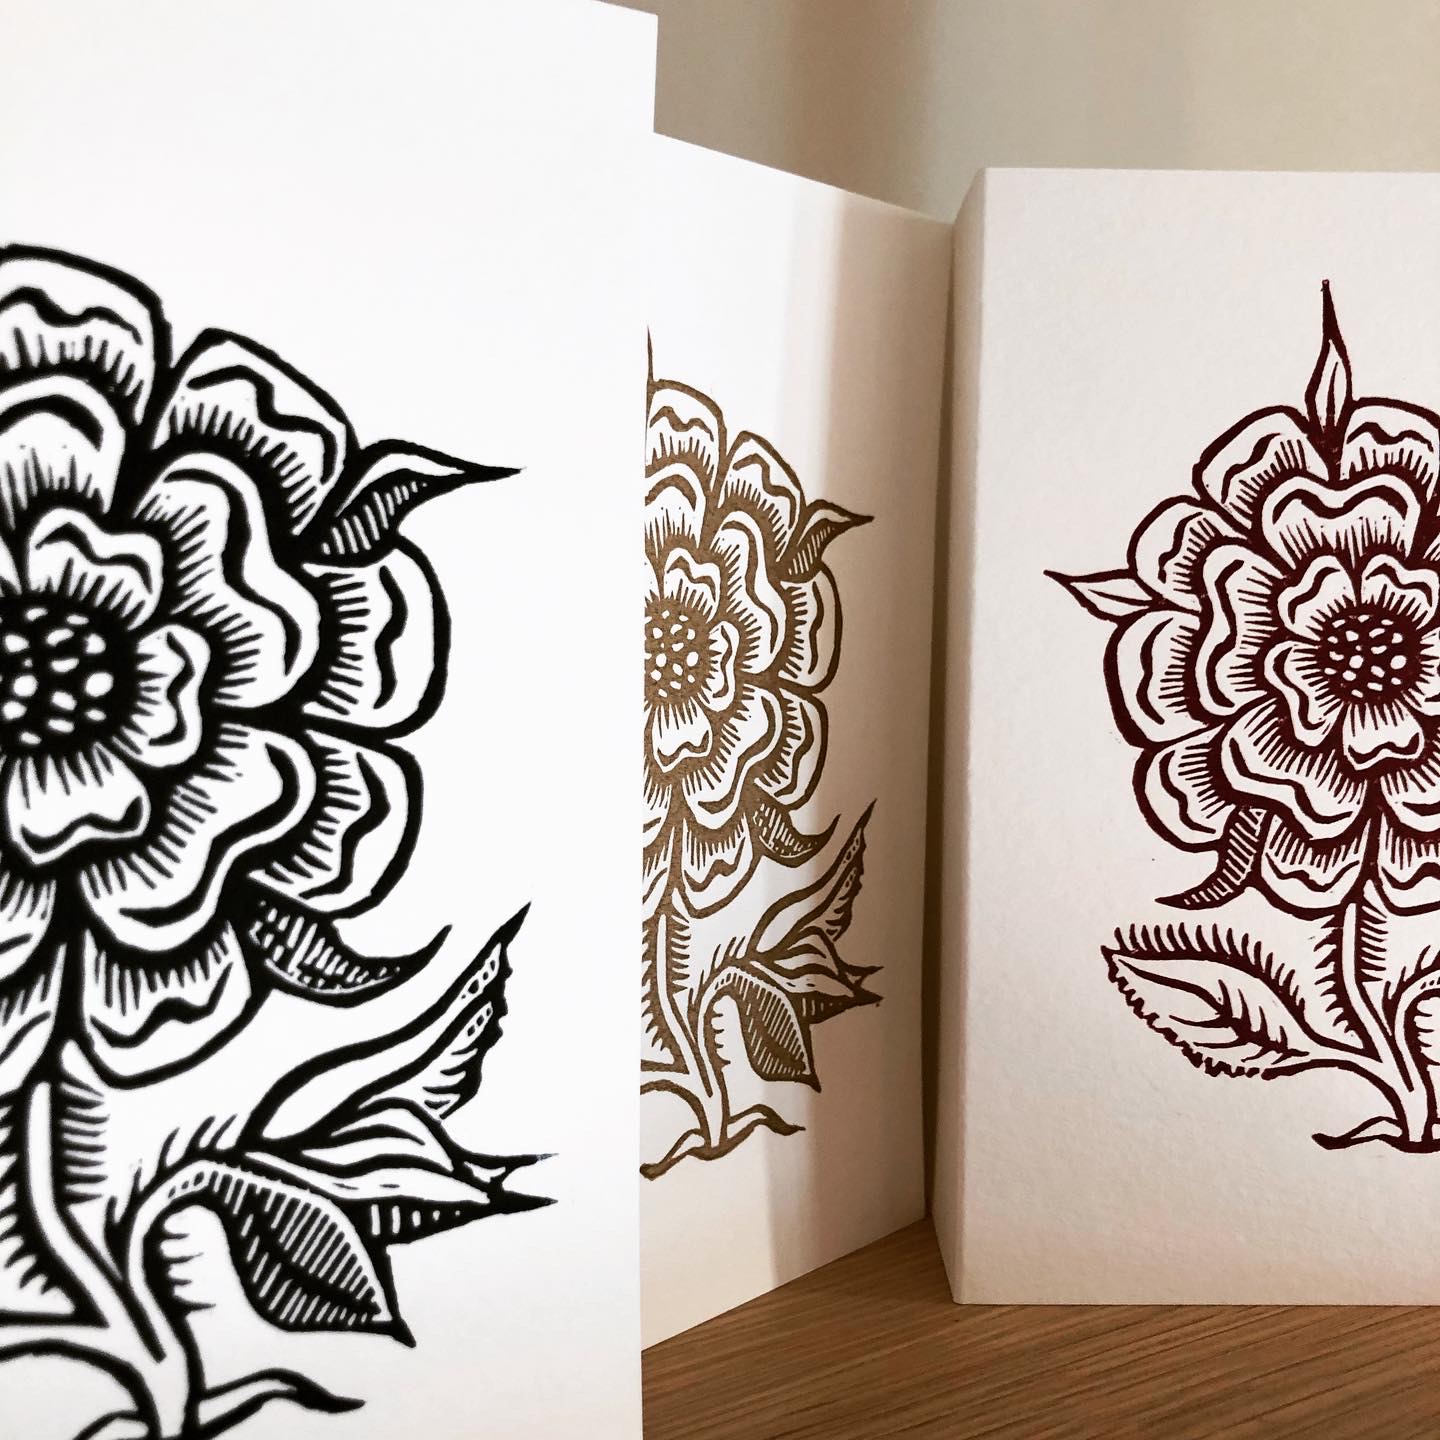 Three hand-printed linocut cards featuring a wild rose in red-violet, midnight blue, and metallic gold.